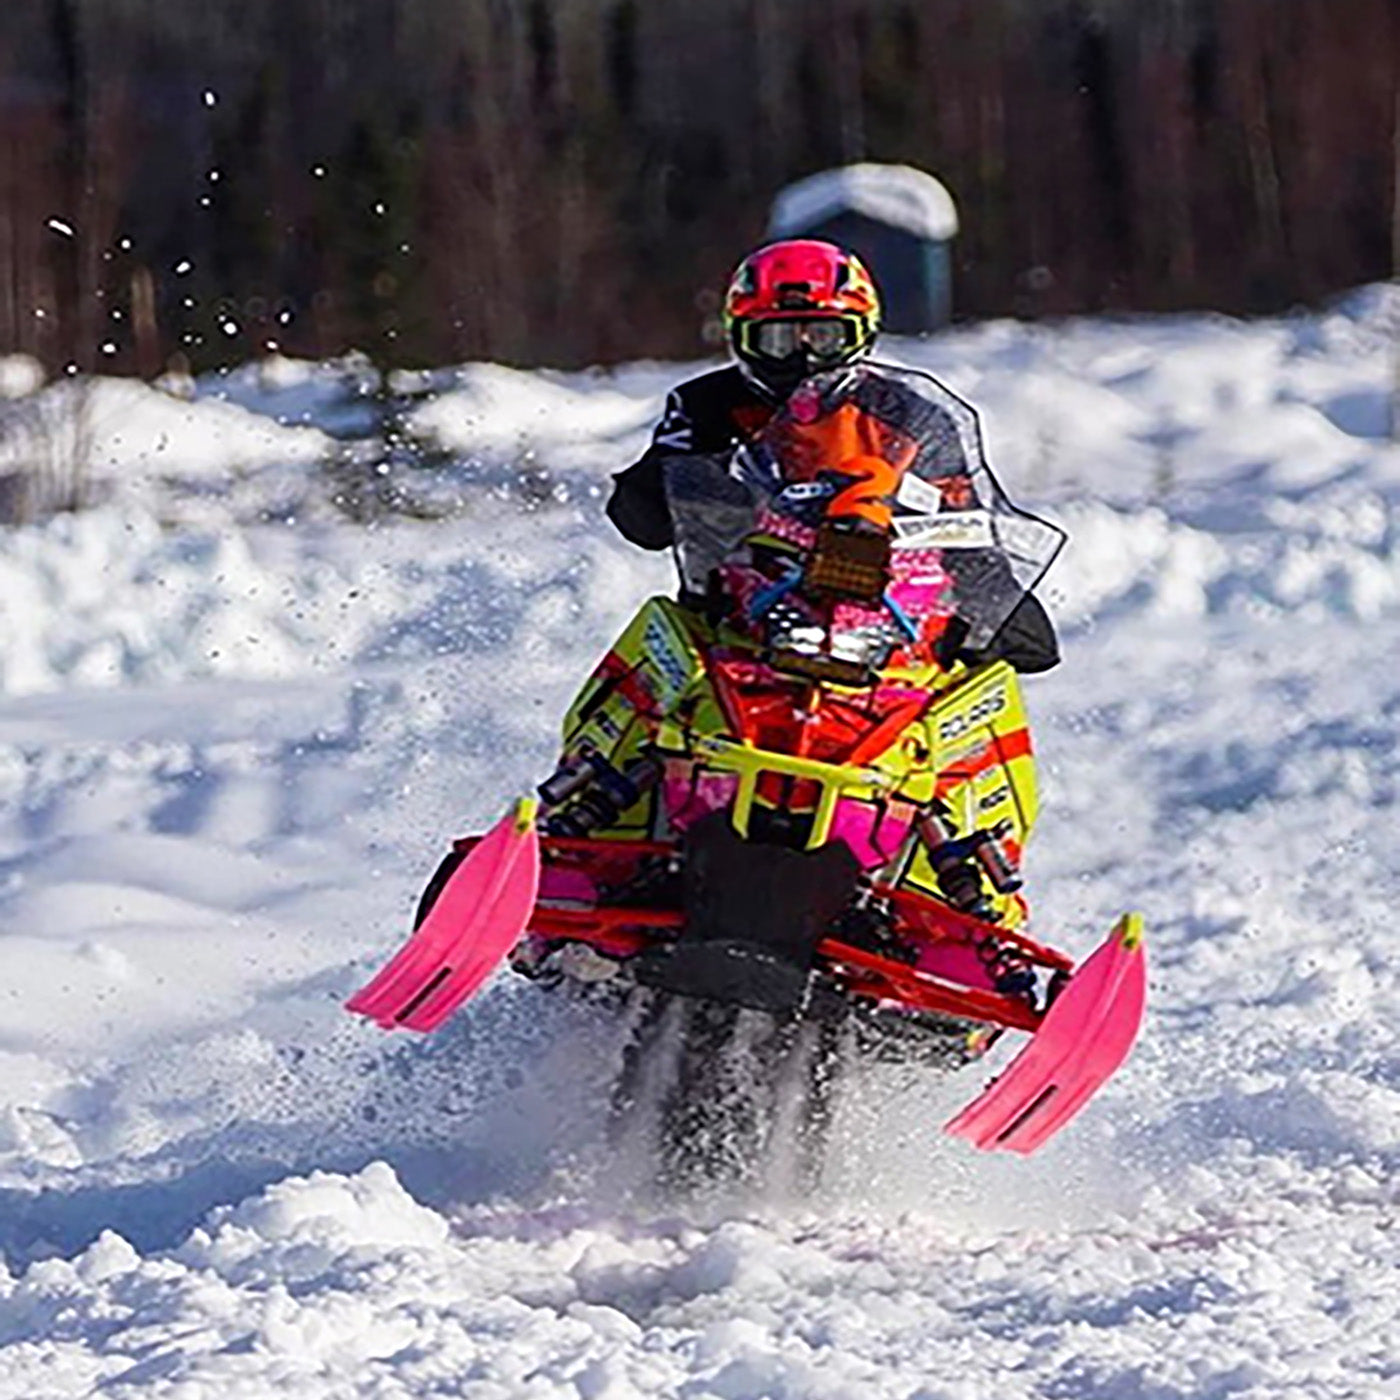 Pro Snowmobile Racer Leah Bauer using pink C&A Pro skis with yellow handles on her sled during a race. 